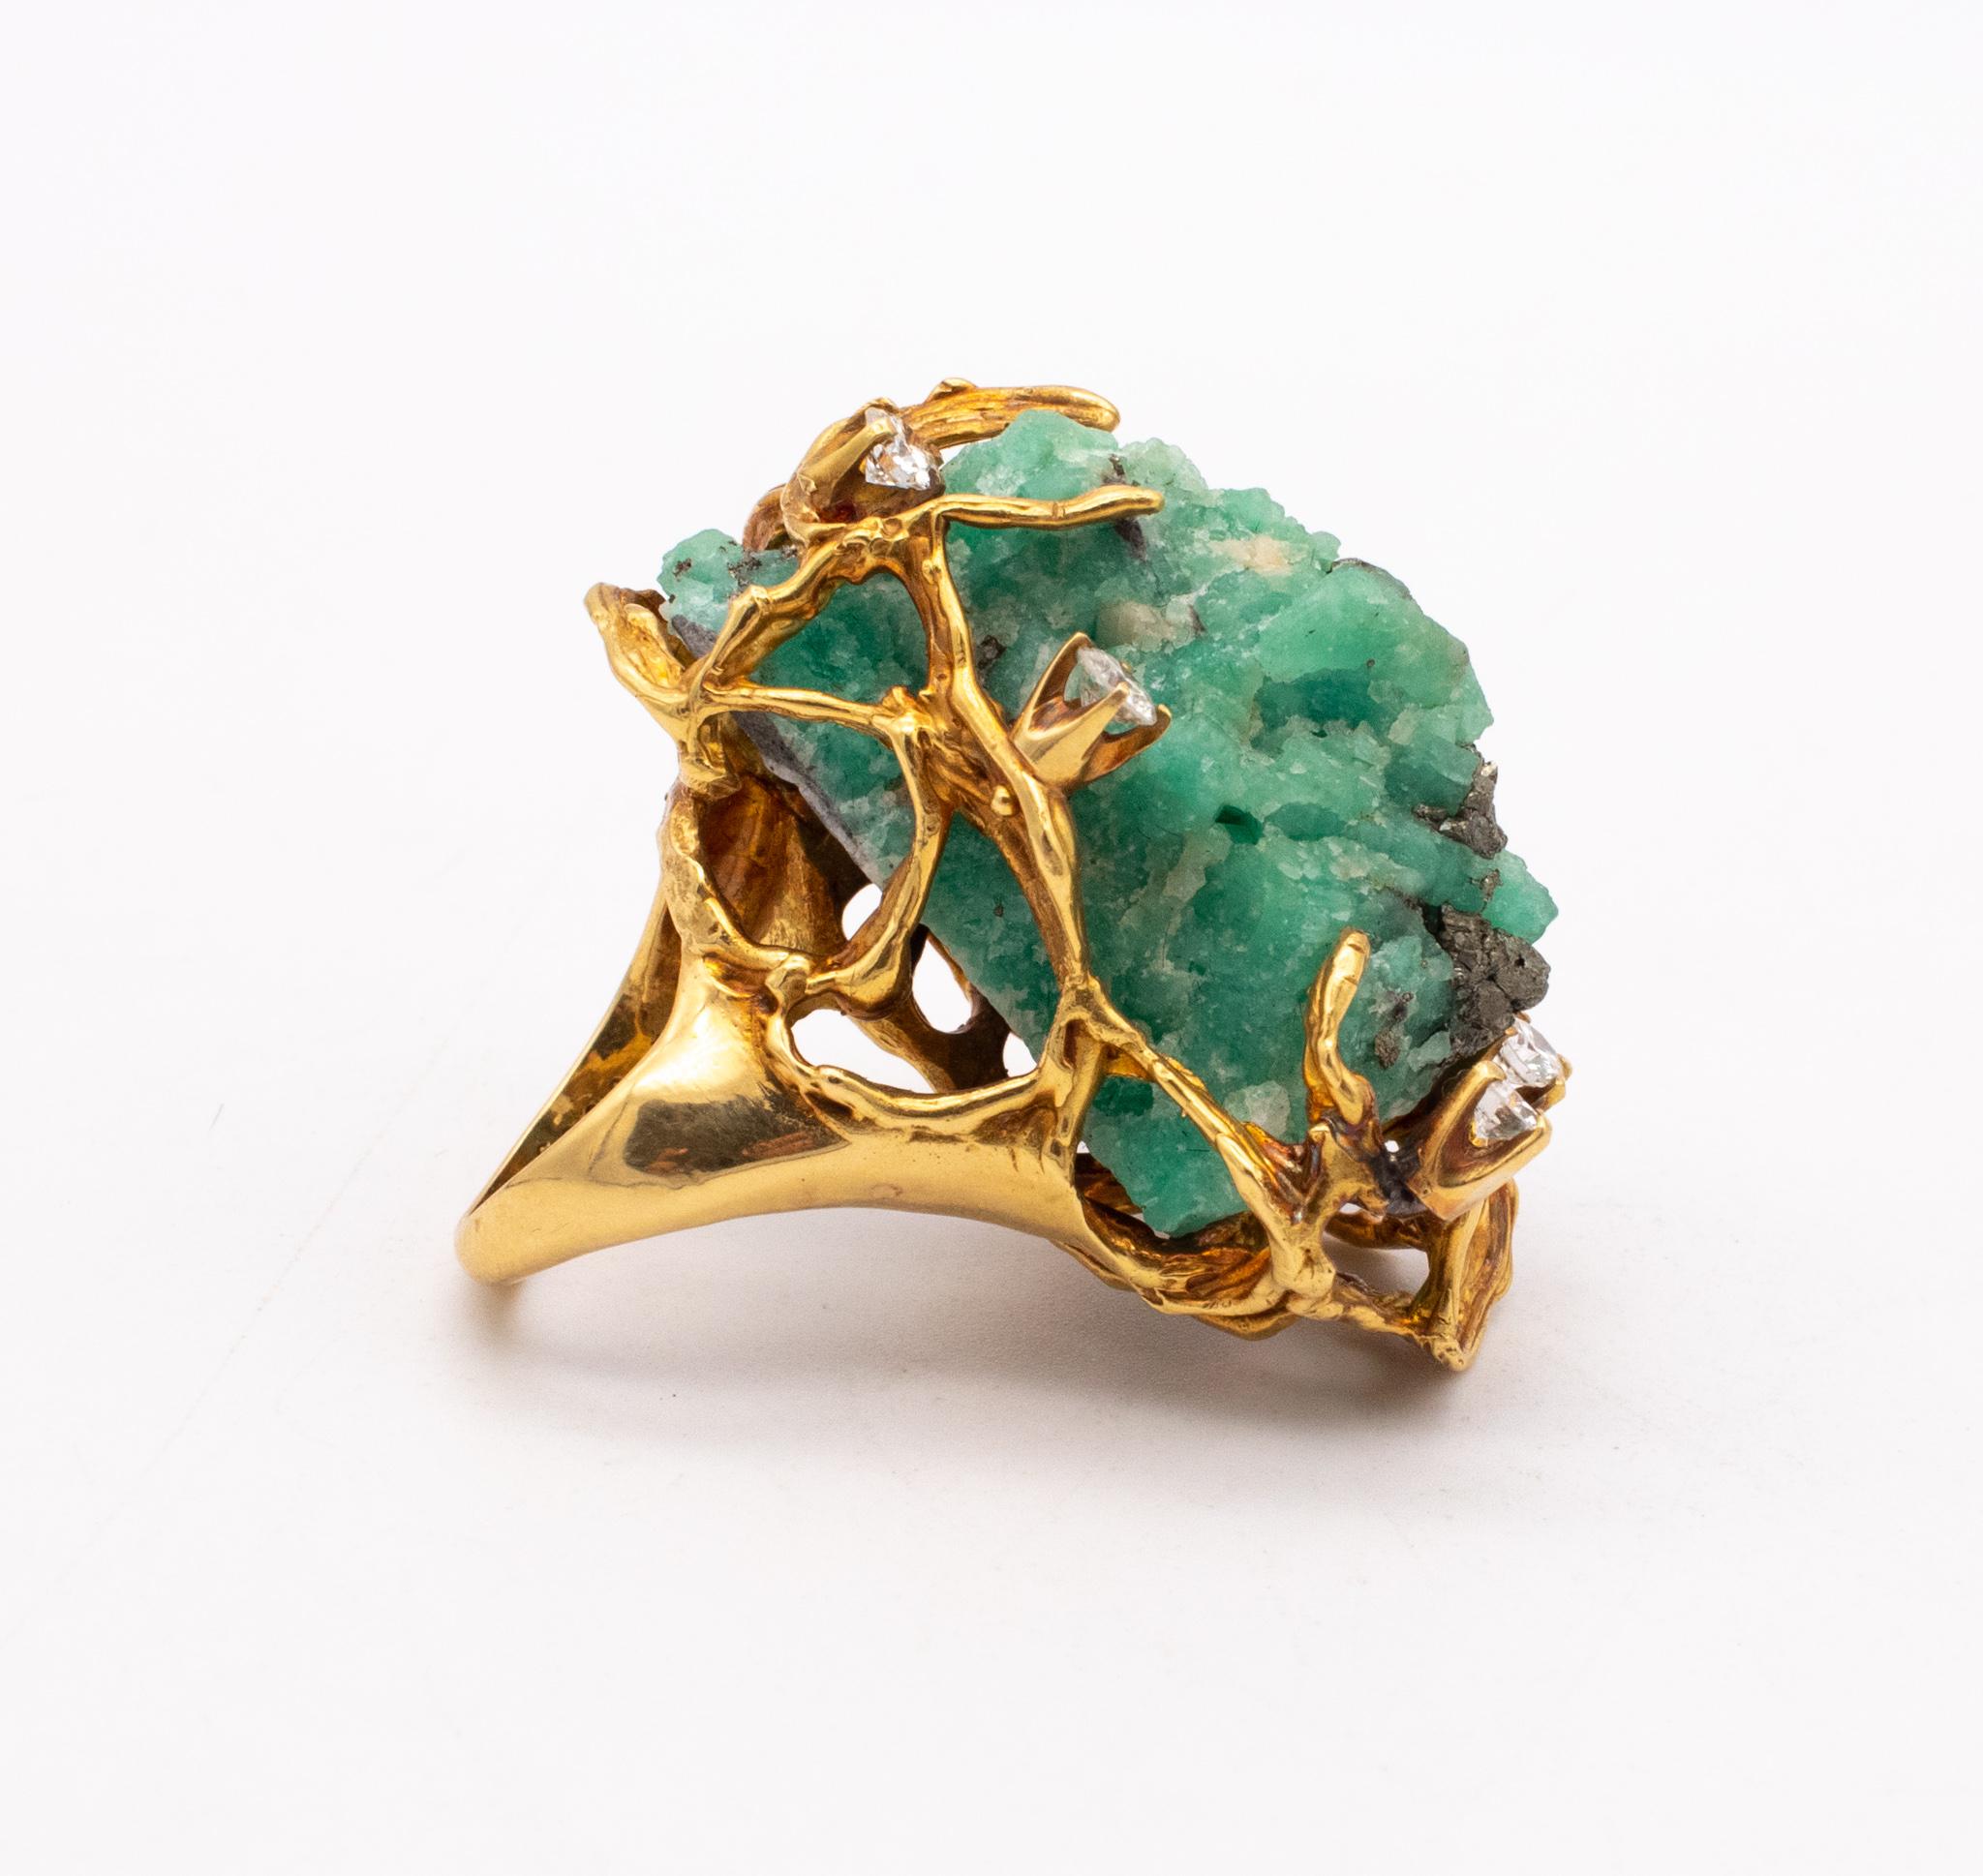 Modernist 1960 Massive Cocktail Ring in 18k with VS Diamonds and Rough Emerald In Excellent Condition For Sale In Miami, FL